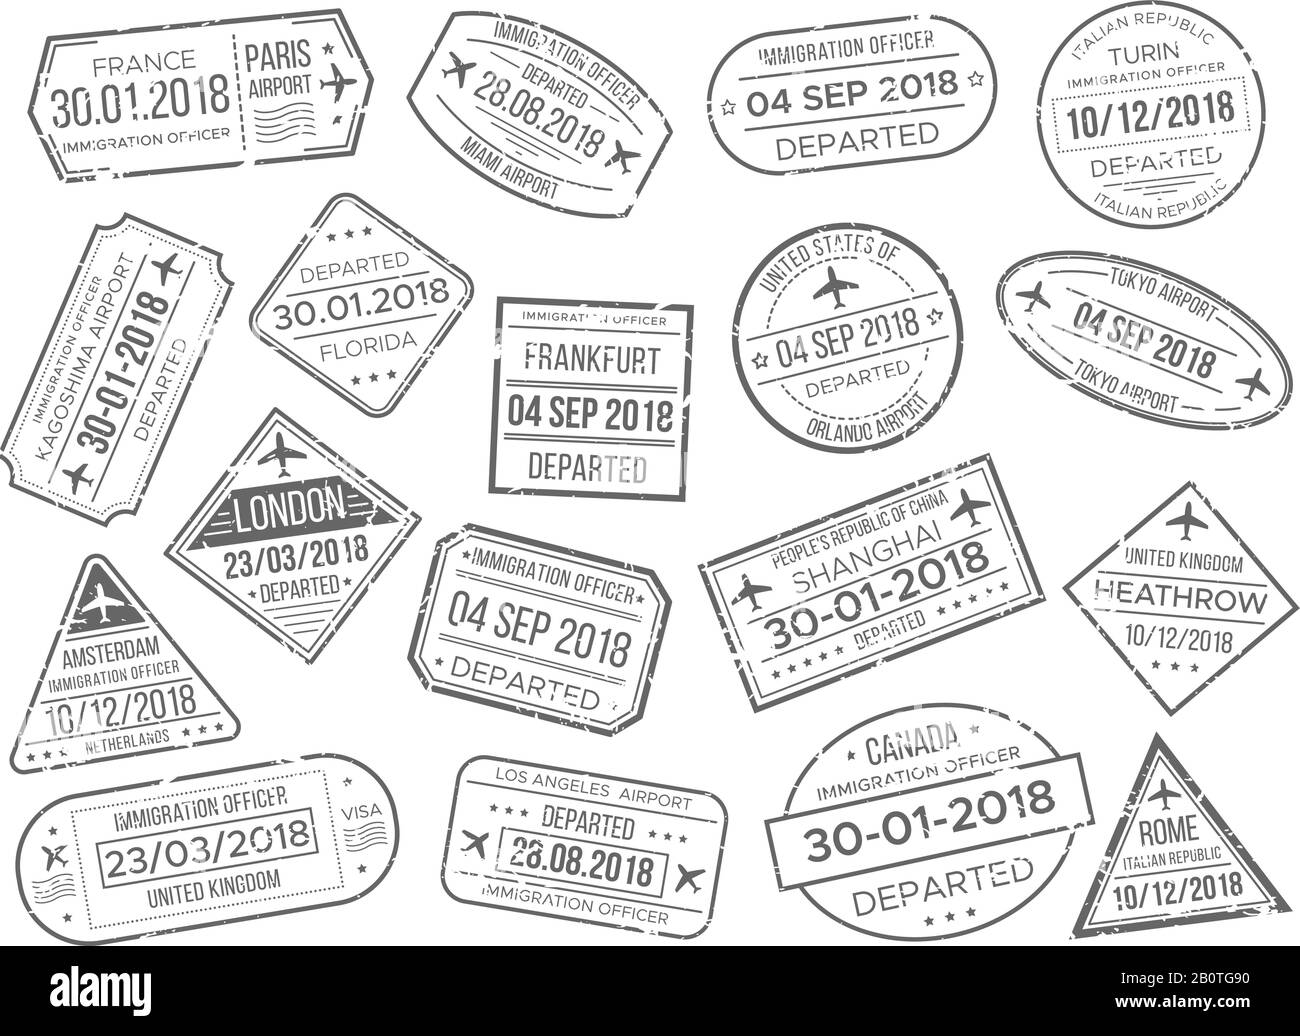 Business airport cachet mark and customs passports control stamp. Foreign travel and immigration passport official stamps vector set Stock Vector